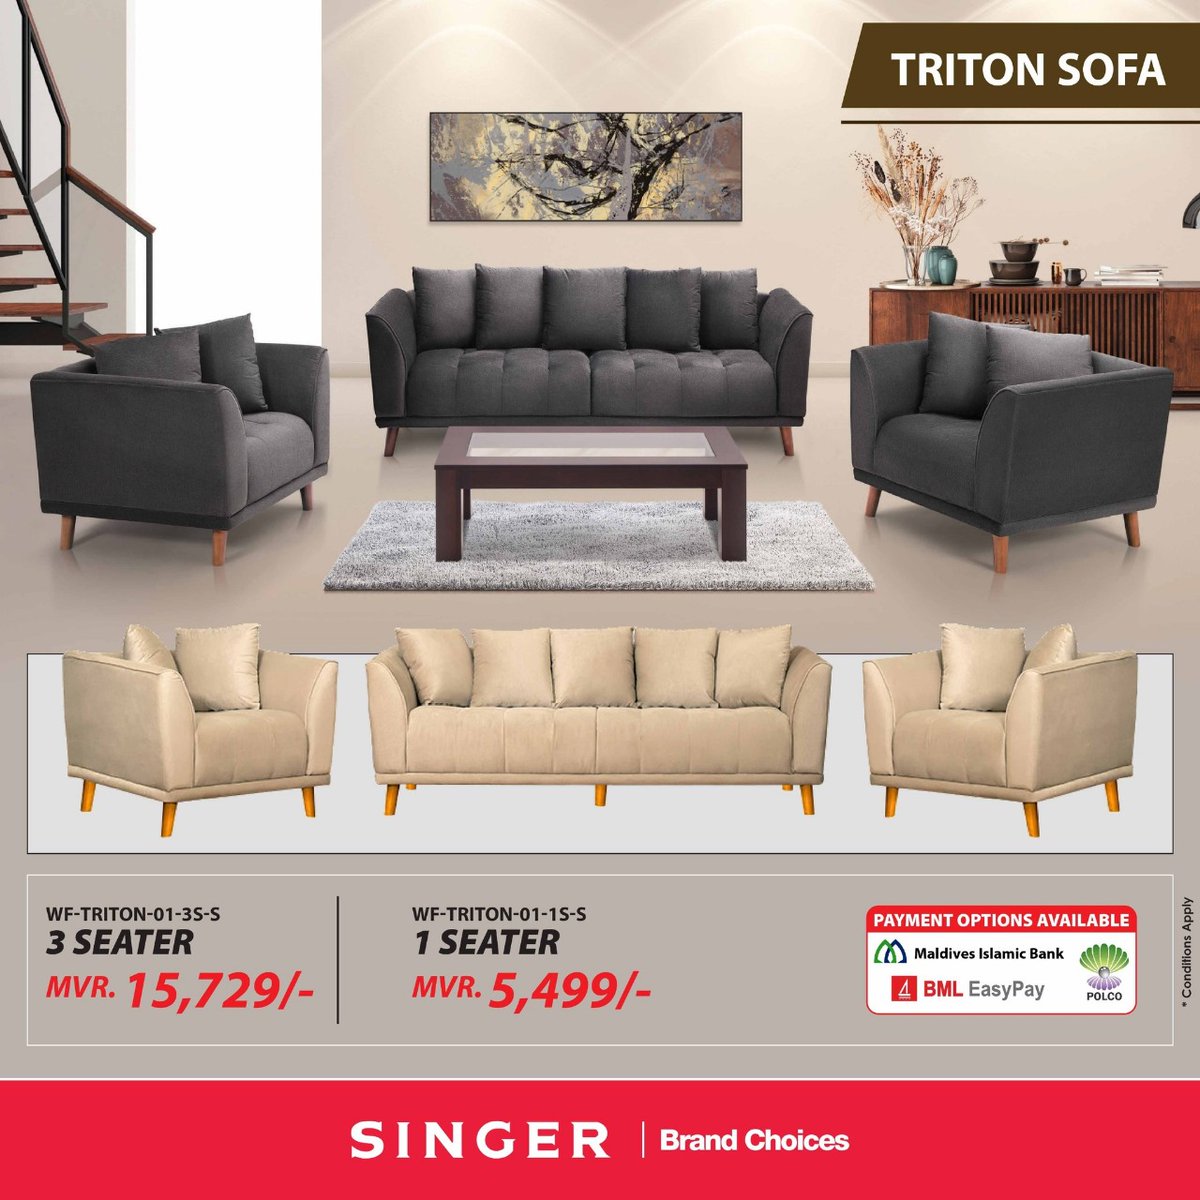 Experience luxury and comfort with Singer's premium sofa. Crafted with high-quality wooden structure and made in Sri Lanka, it's the perfect blend of style and durability.

#sofaSale #furniture #livingRoom #homeDecor #singerFurniture #comfort #InteriorDesign #homeFurnishings